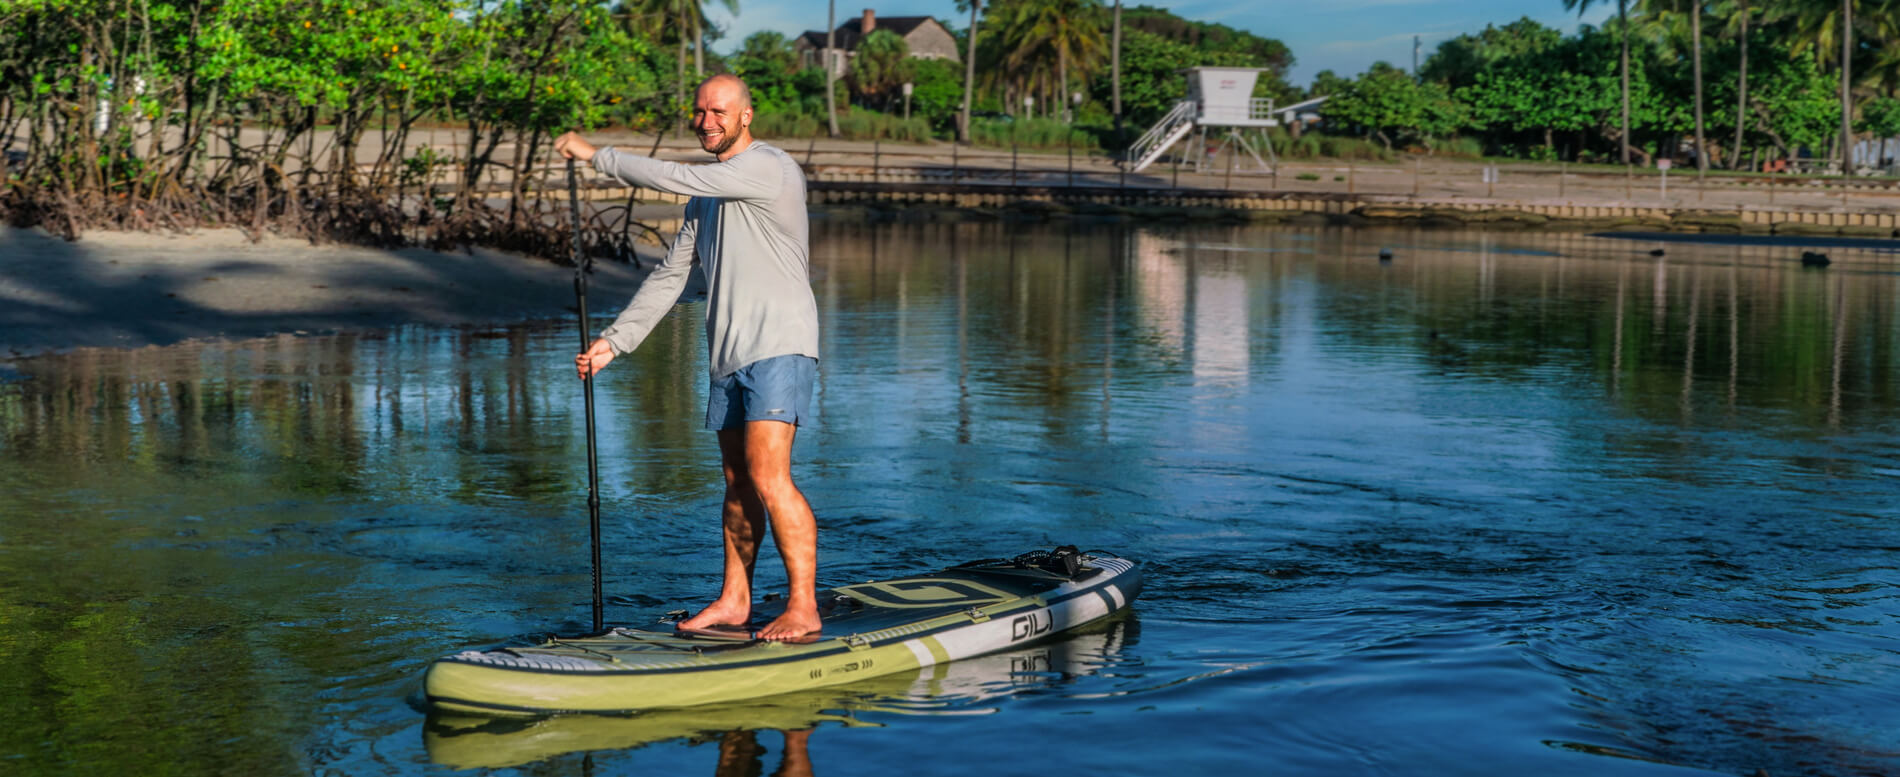 How to Paddle Board: SUP 101